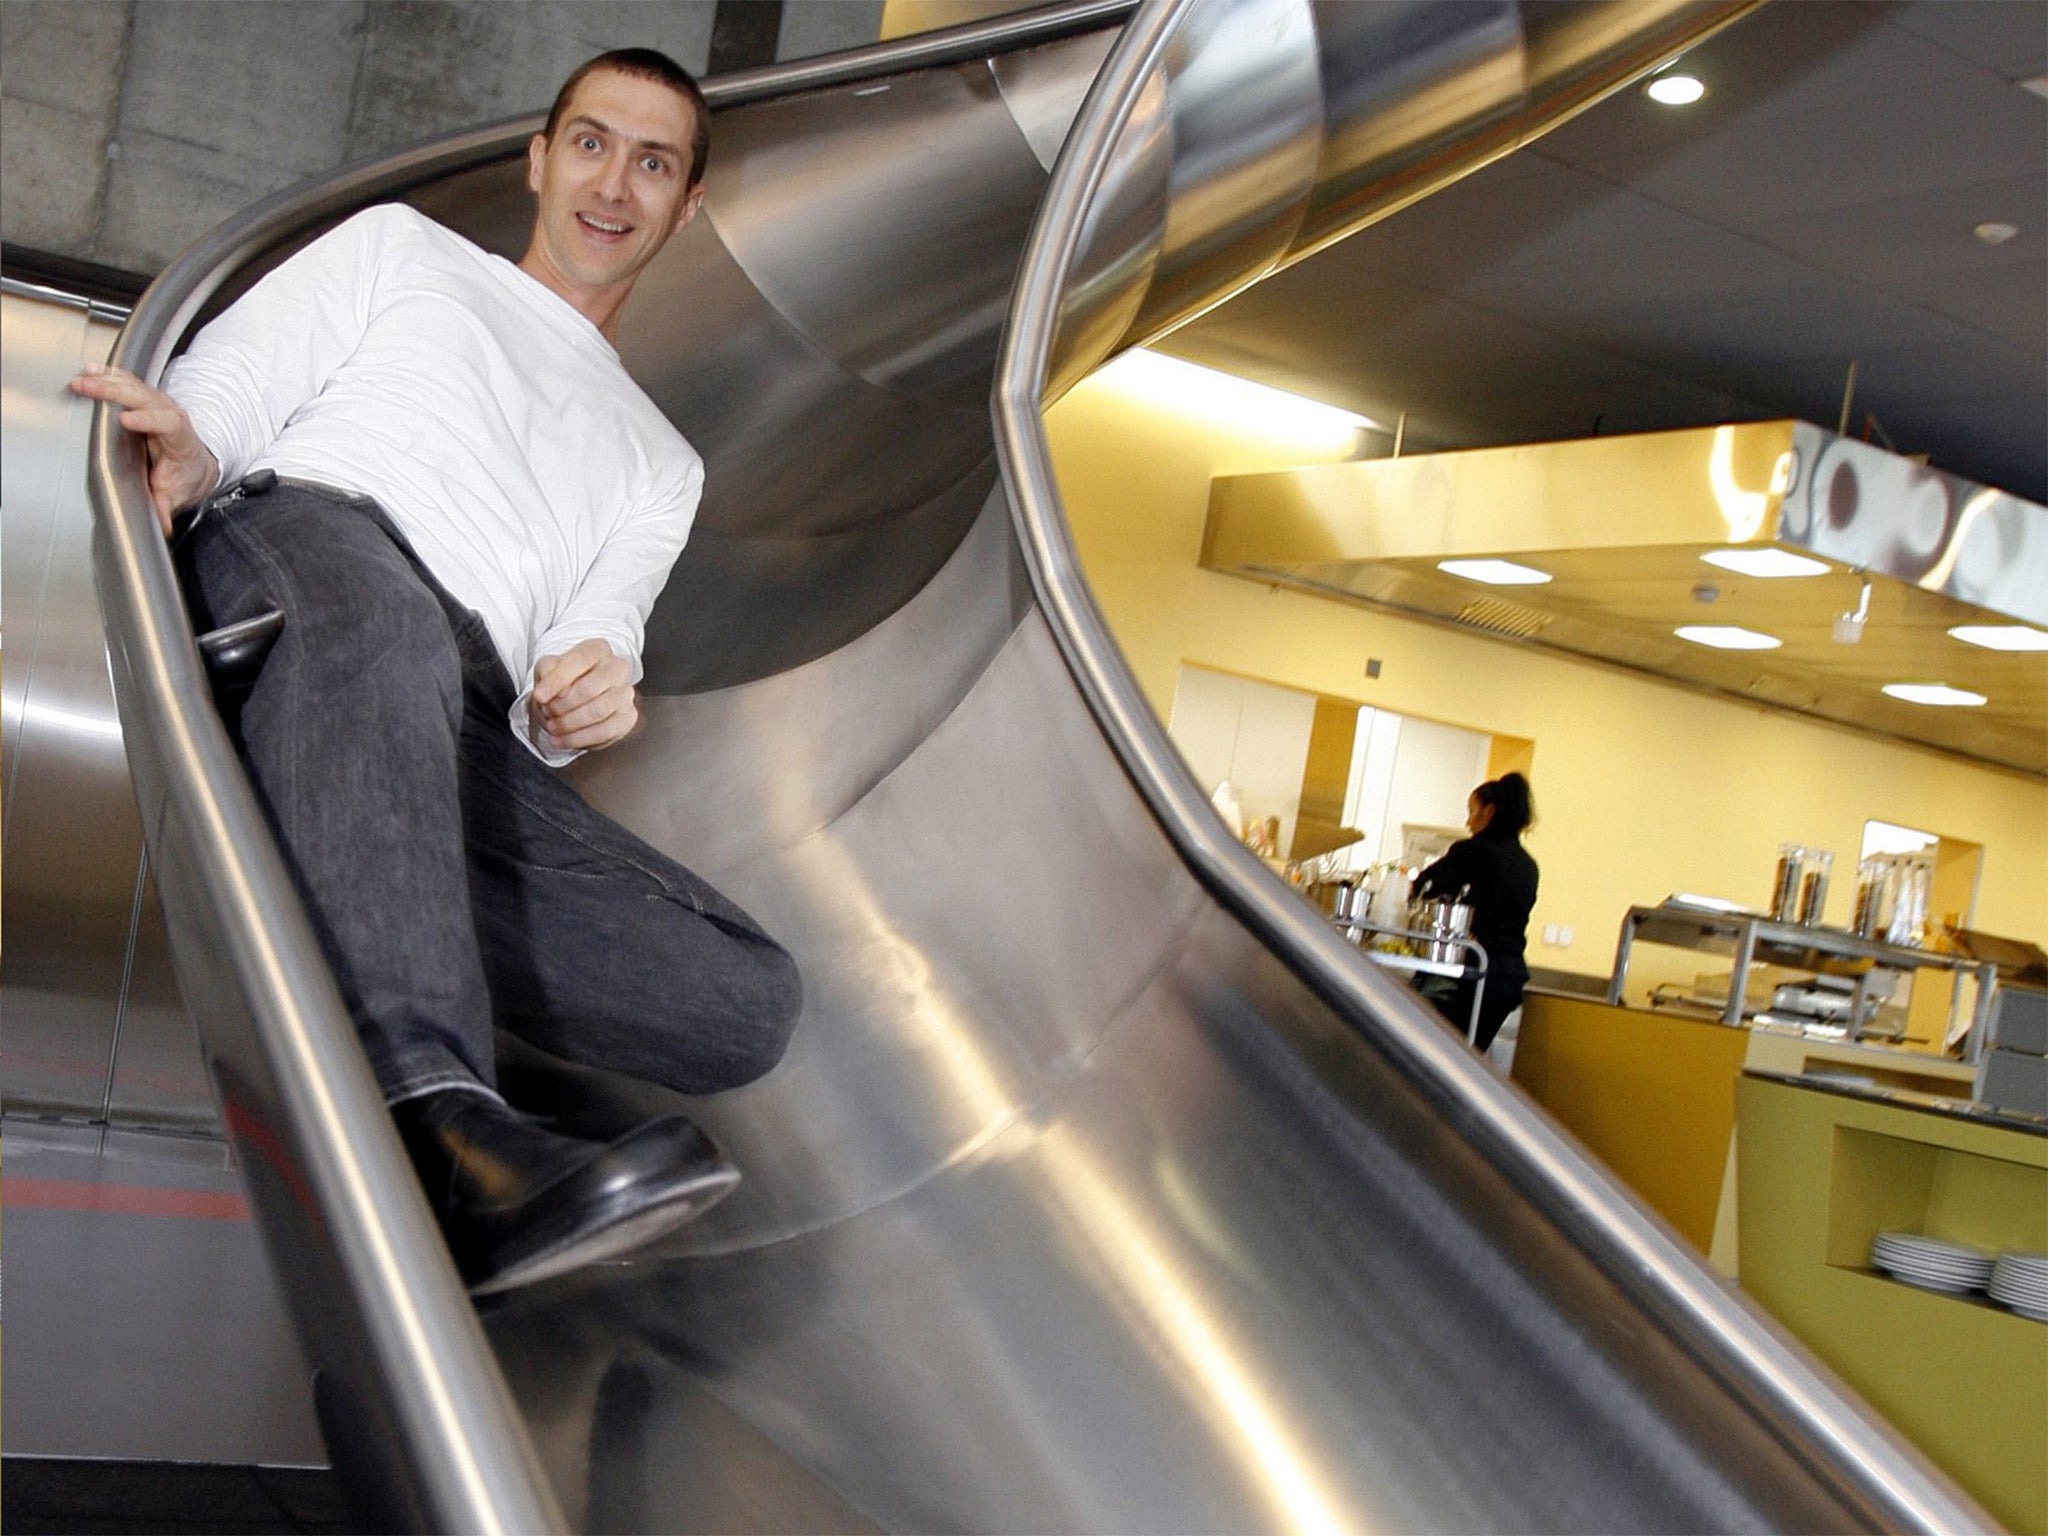 Down time: an employee of Google uses the slide to get to the canteen